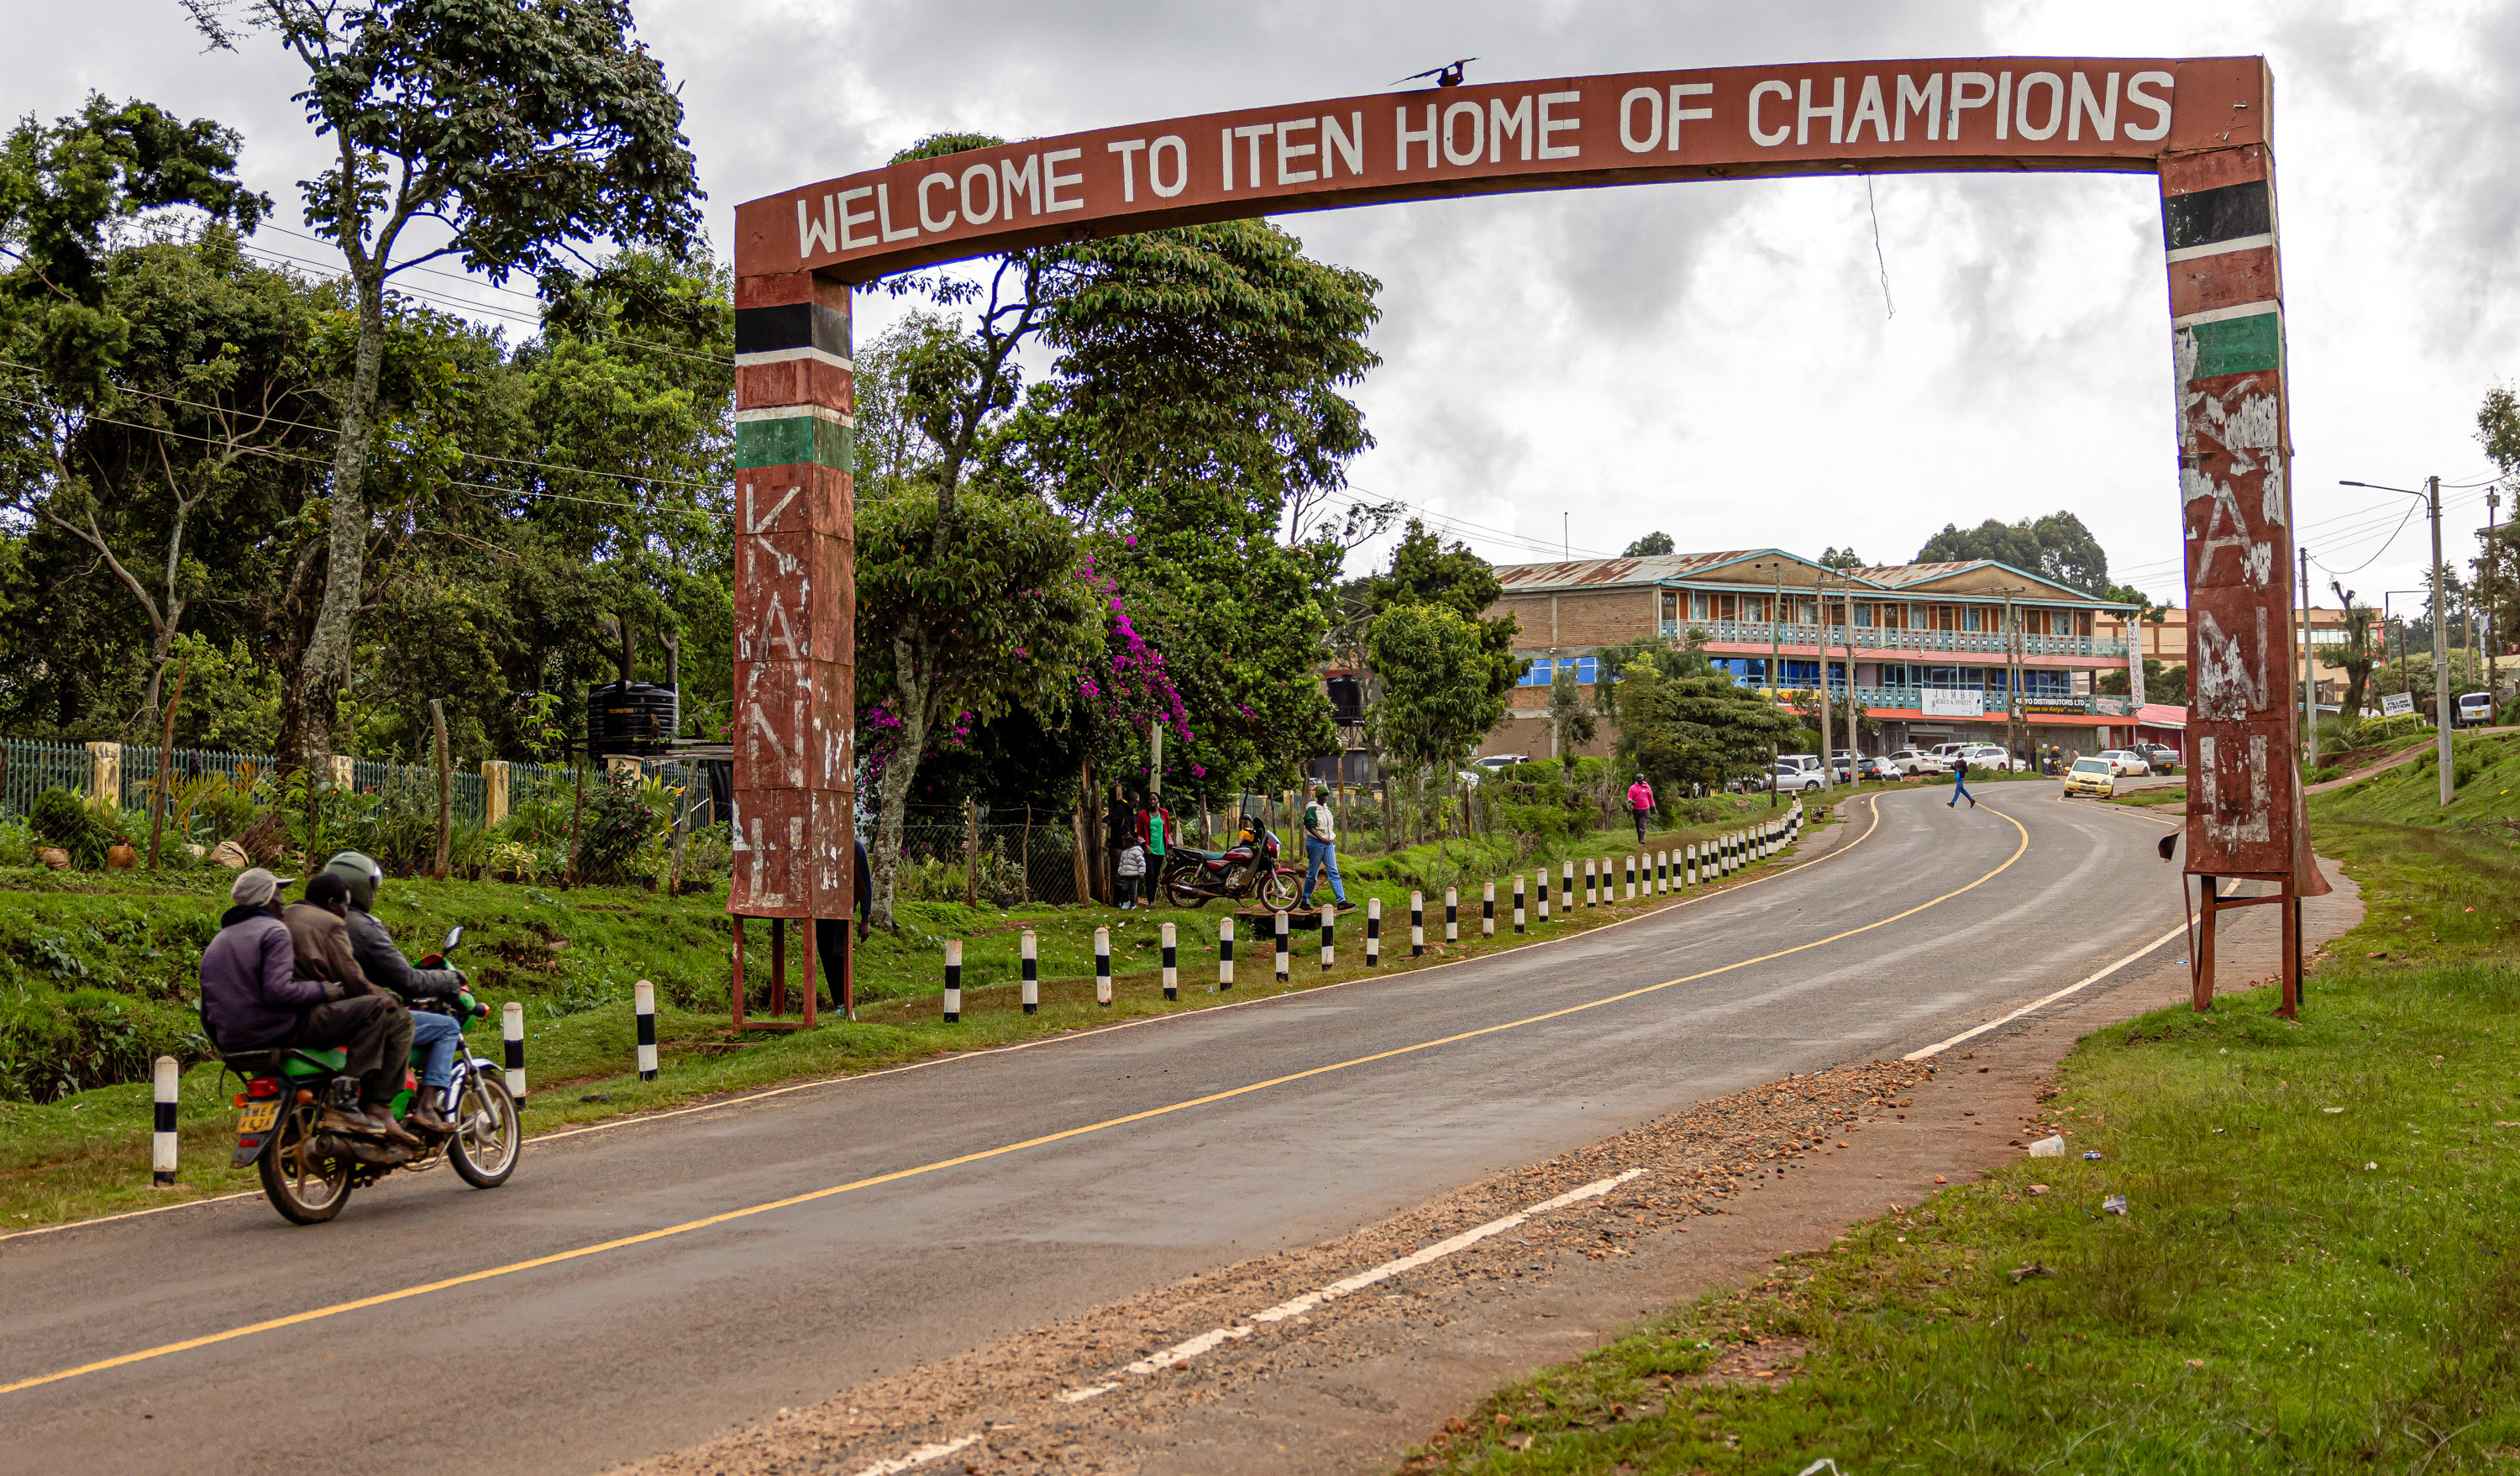 A motorcycle drives past a sign that reads “Welcome to Iten Home of Champions”